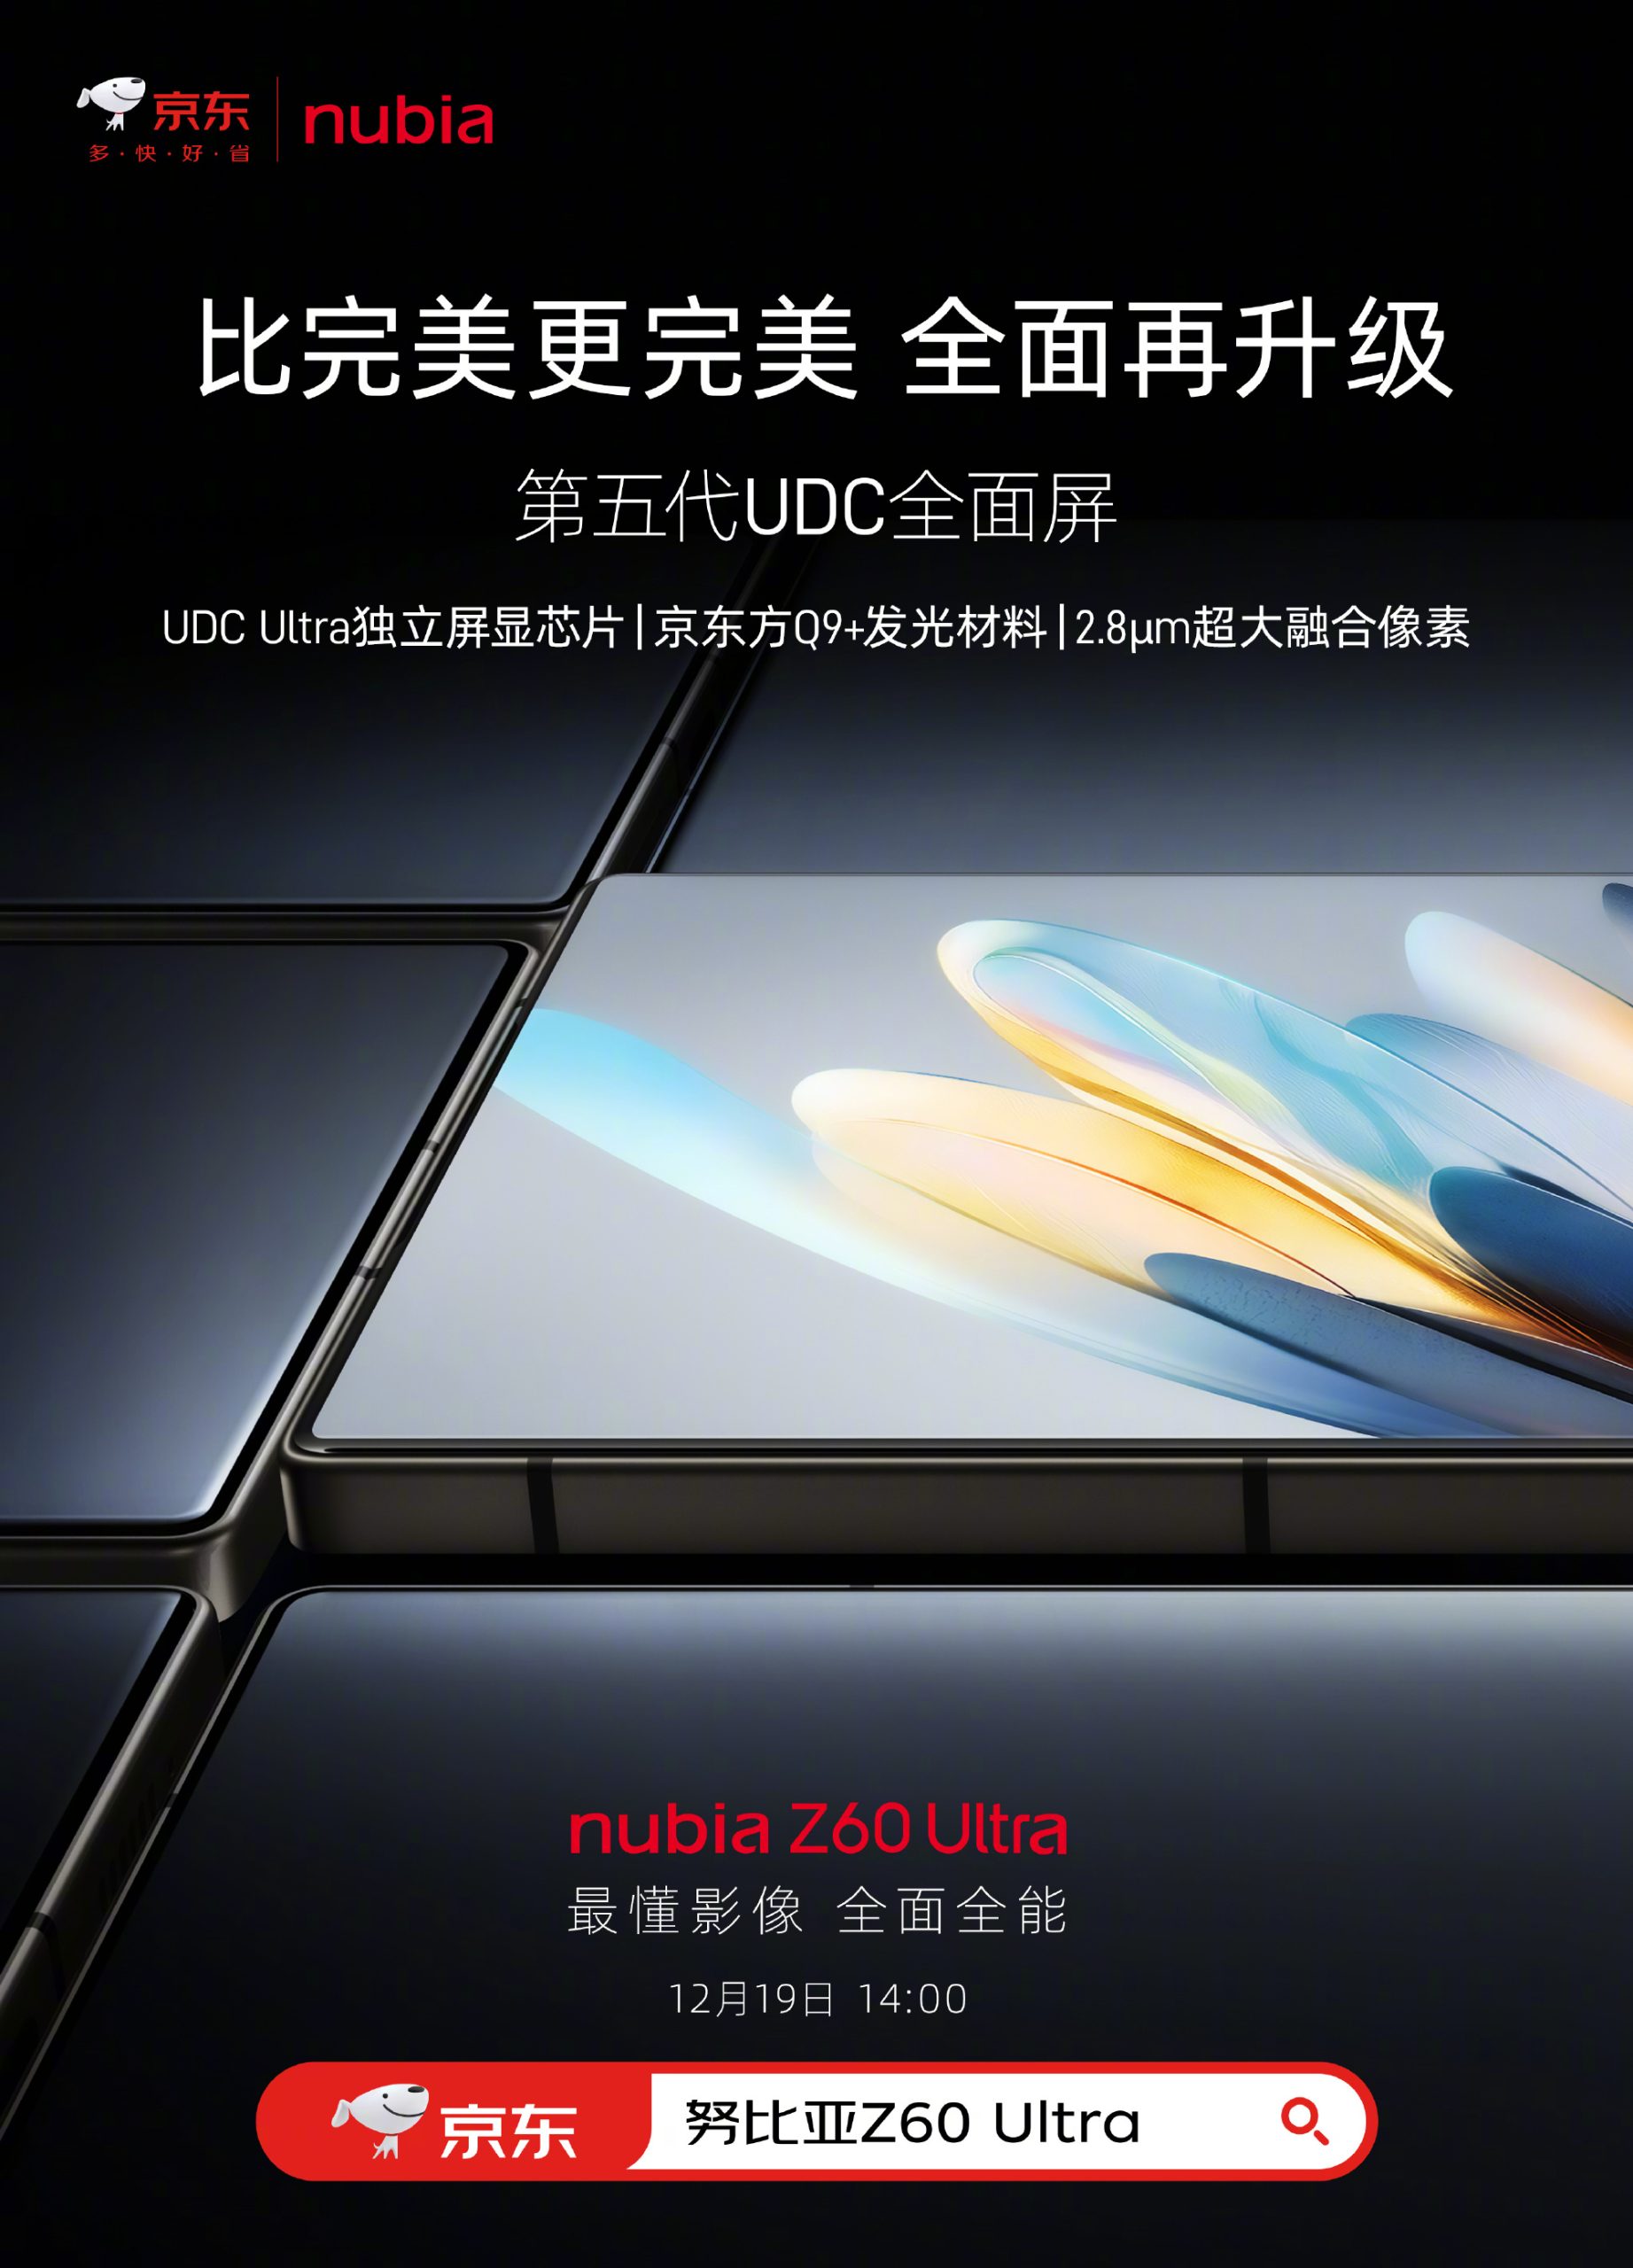 It's official: the Nubia Z60 Ultra will make its debut at a presentation on  19 December